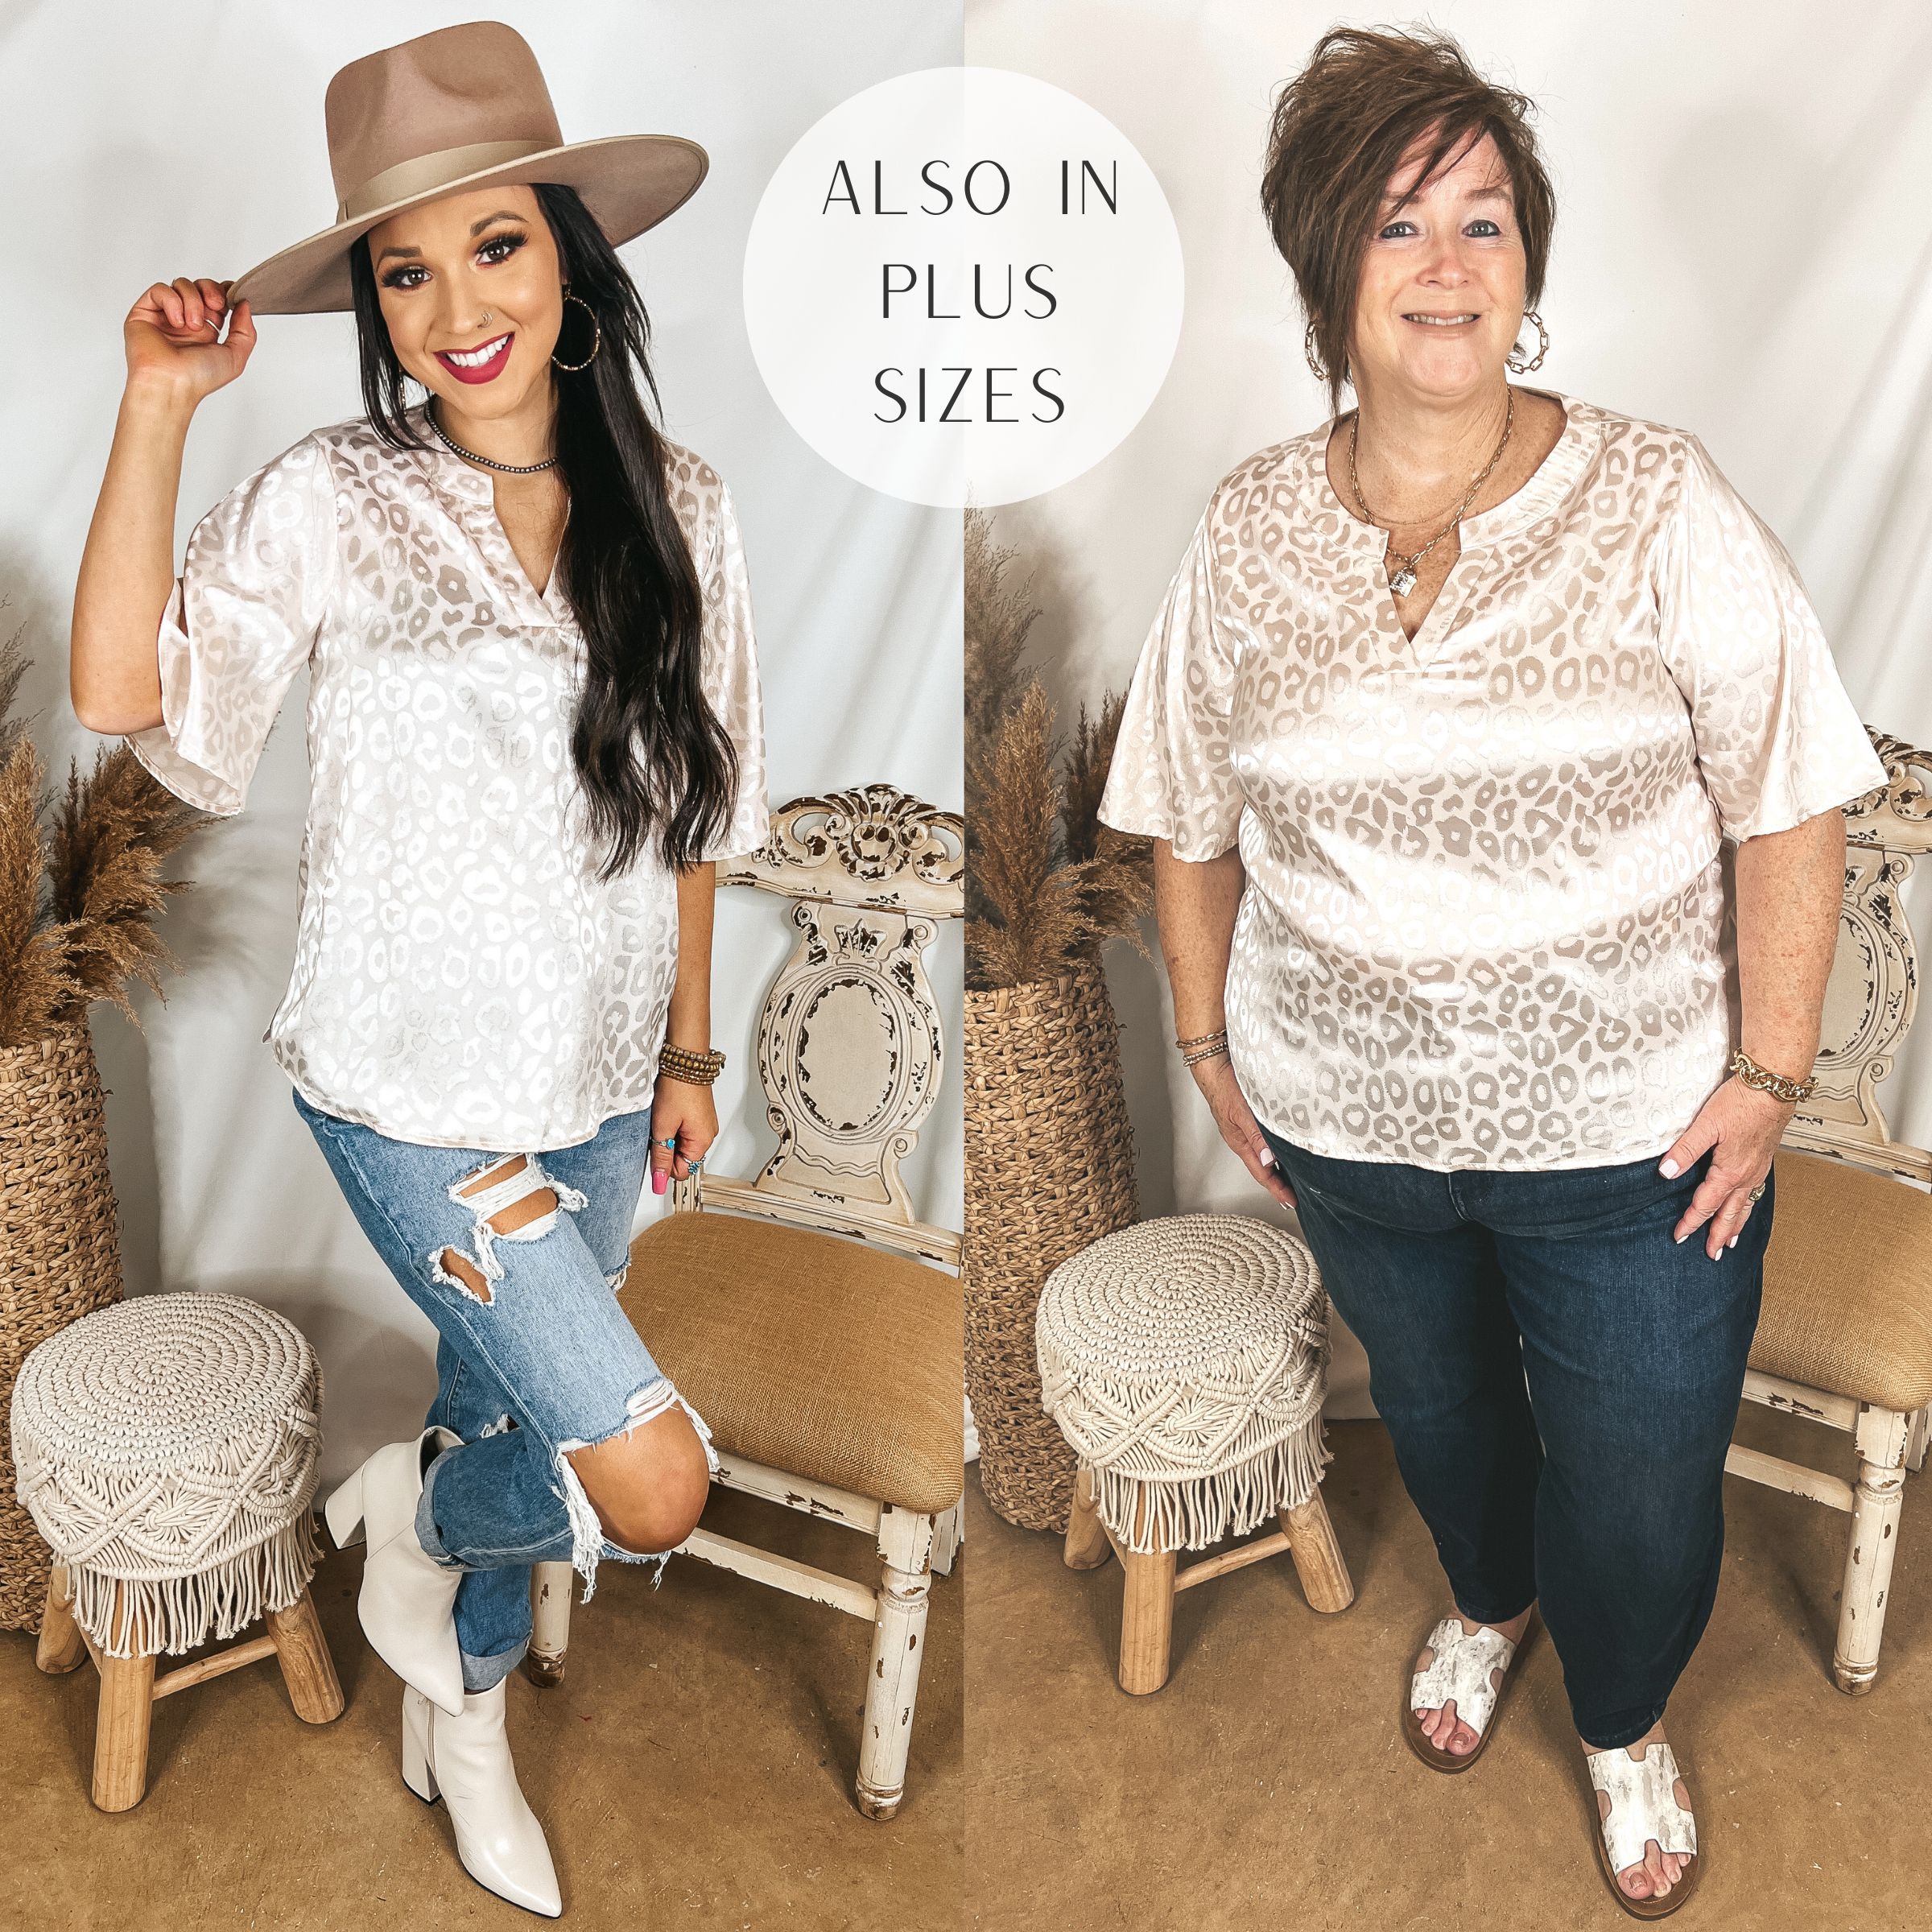 Models are wearing an ivory satin top that has a shiney leopard print. Size small model has it paired with light wash distressed jeans, white booties, and a tan hat. Plus size model has it paired with dark wash jeans, white sandals, and gold jewelry.